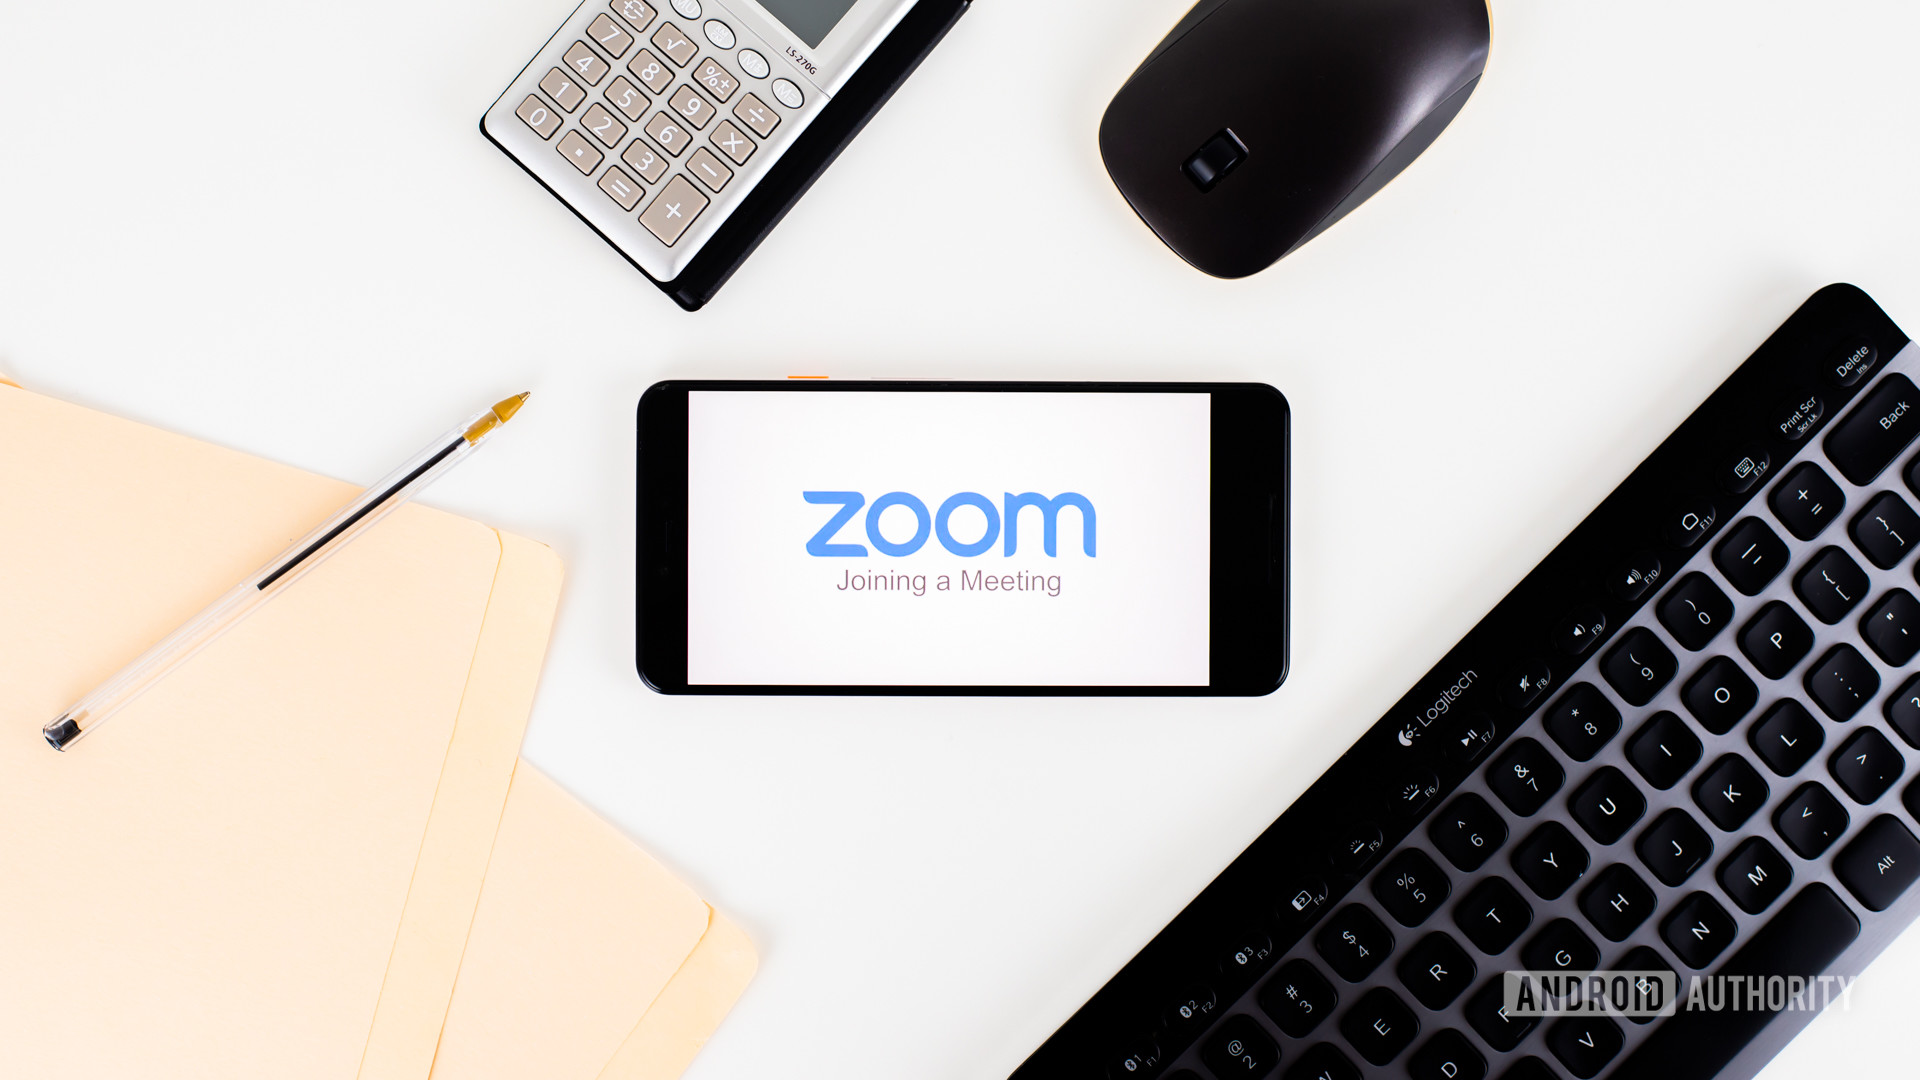 Zoom Meetings on smartphone next to office equipment stock 1